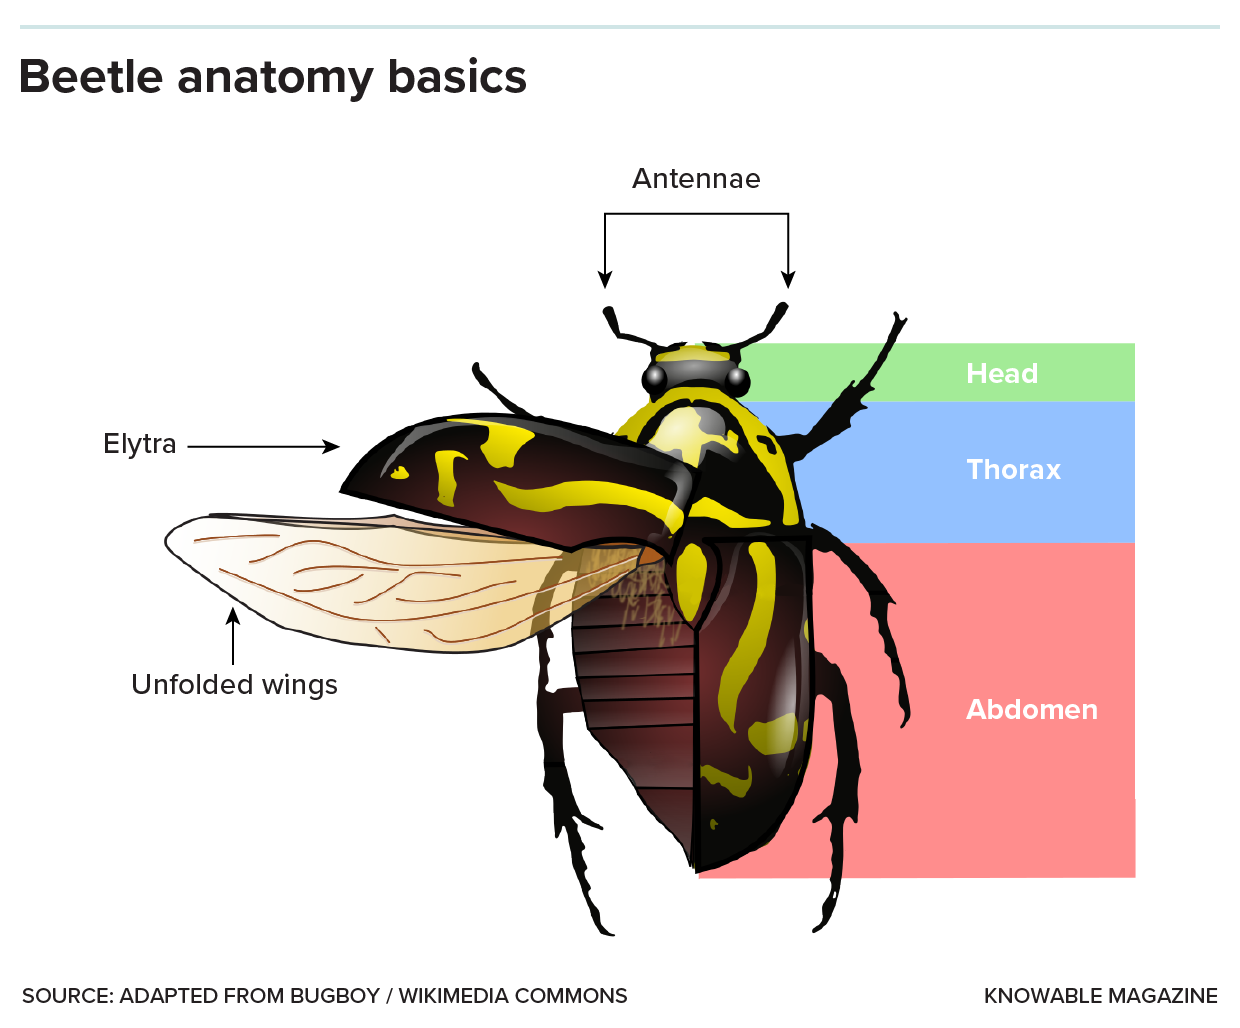 An illustration of a Fiddler beetle diagrams the main parts of the insect body: antennae, head, thorax, abdomen, legs and wing structures.